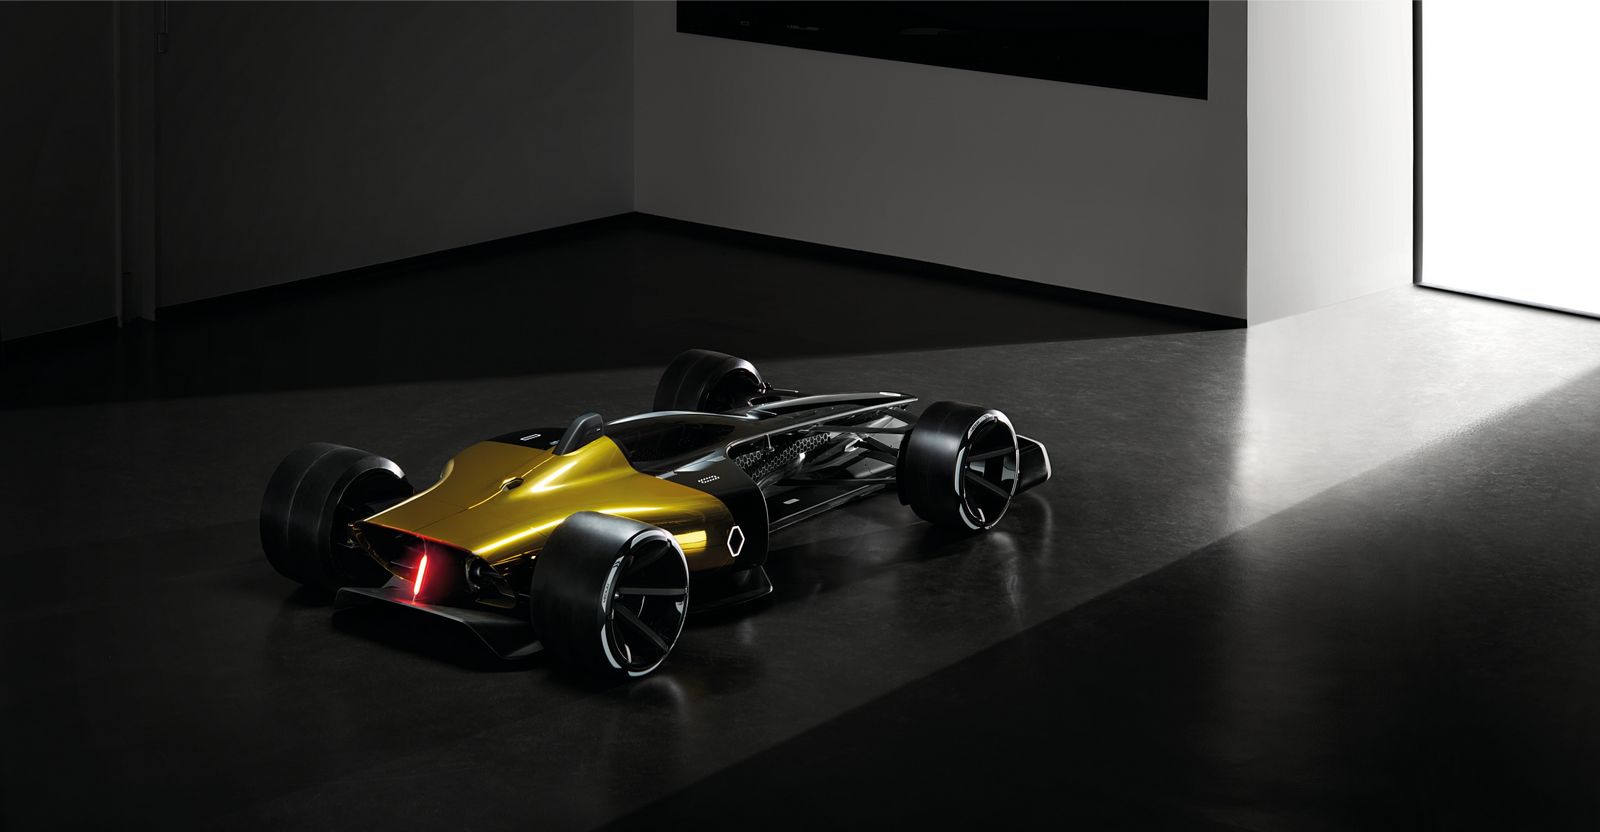 Renault RS 2027 Vision Concept, 2017